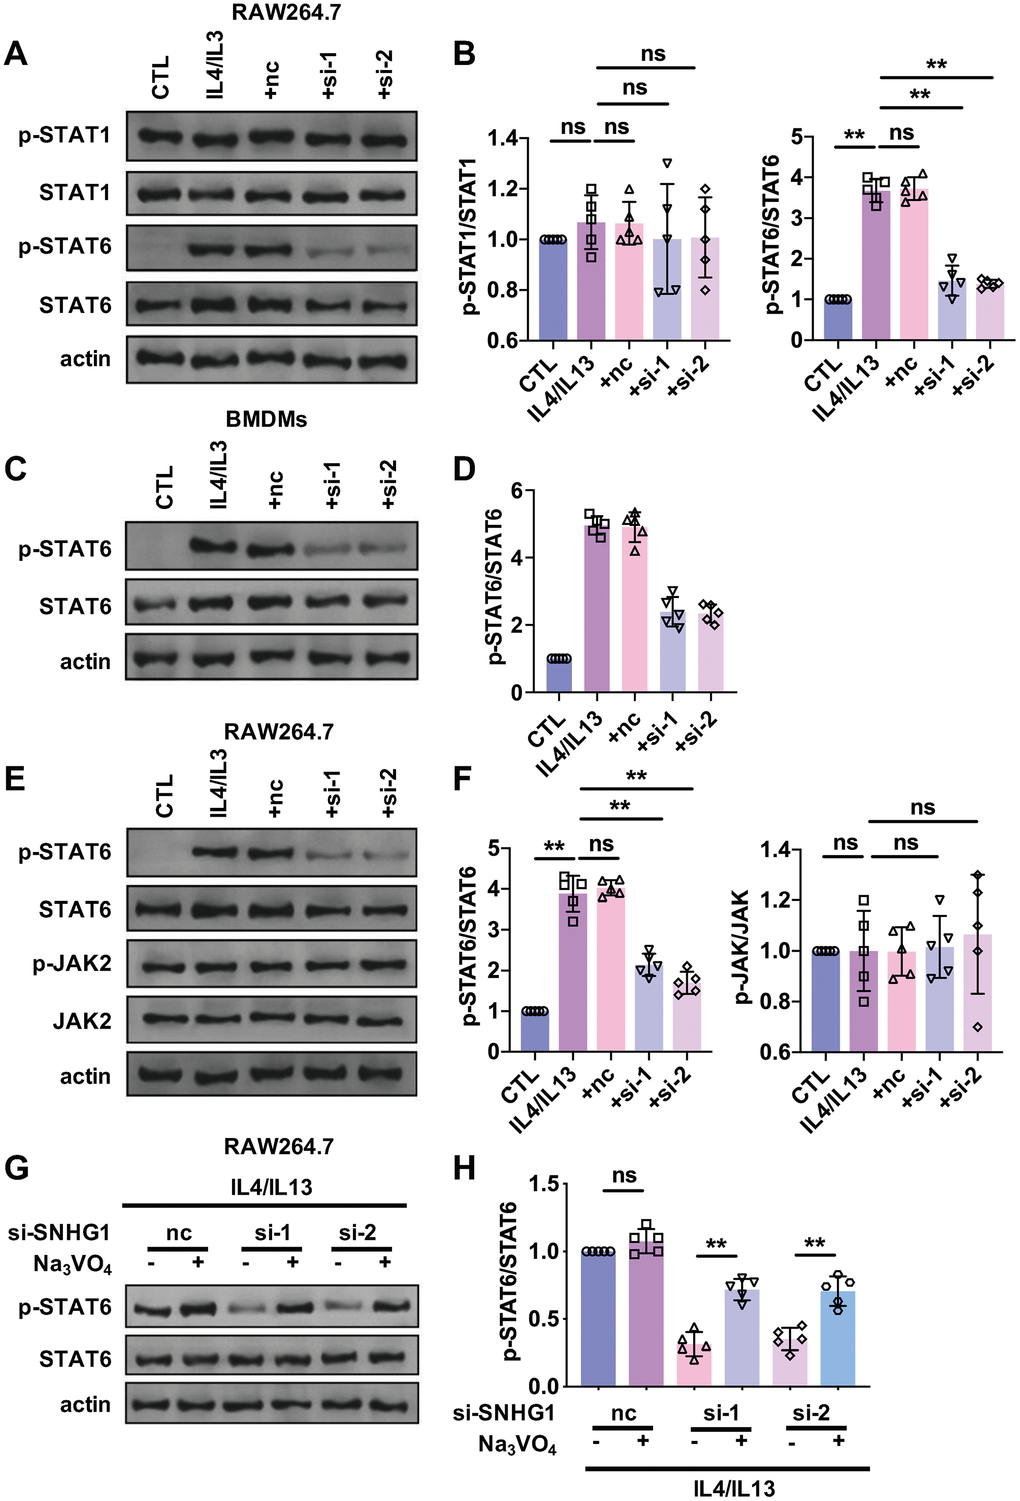 STAT6 was involved in the regulation of M2 macrophage polarization mediated by lncRNA-SNHG1. (A, B) Western blot was performed to detect the protein levels of STAT1, p-STAT1, STAT6, and p-STAT6. RAW264.7 cells were transfected with two siRNAs of lncRNA-SNHG1 and negative control siRNA for 48h and treated with IL4/IL13 or LPS/INFγ for 72h. one-way ANOVA was used for the statistical analysis. n=5 independent cell cultures. The bar indicates the SD values. **PC, D) Western blot was performed to detect the protein levels of STAT6 and p-STAT6. BMDMs were transfected with two siRNAs of lncRNA-SNHG1 and negative control siRNA for 48h and treated with IL4/IL13 or LPS/INFγ for 72h. one-way ANOVA was used for the statistical analysis. n=5 independent cell cultures. The bar indicates the SD values. **PE, F) Western blot was performed to detect the protein levels of STAT6, p-STAT6, JAK, and p-JAK. RAW264.7 cells were transfected with two siRNAs of lncRNA-SNHG1 and negative control siRNA for 48h and treated with IL4/IL13 or LPS/INFγ for 72h. one-way ANOVA was used for the statistical analysis. n=5 independent cell cultures. The bar indicates the SD values. **PG, H) Western blot was performed to detect the protein levels of STAT6 and p-STAT6. RAW264.7 cells were transfected with two siRNAs of lncRNA-SNHG1 and negative control siRNA for 48h and treated with IL4/IL13 or LPS/INFγ for 72h. one-way ANOVA was used for the statistical analysis. n=5 independent cell cultures. The bar indicates the SD values. **P